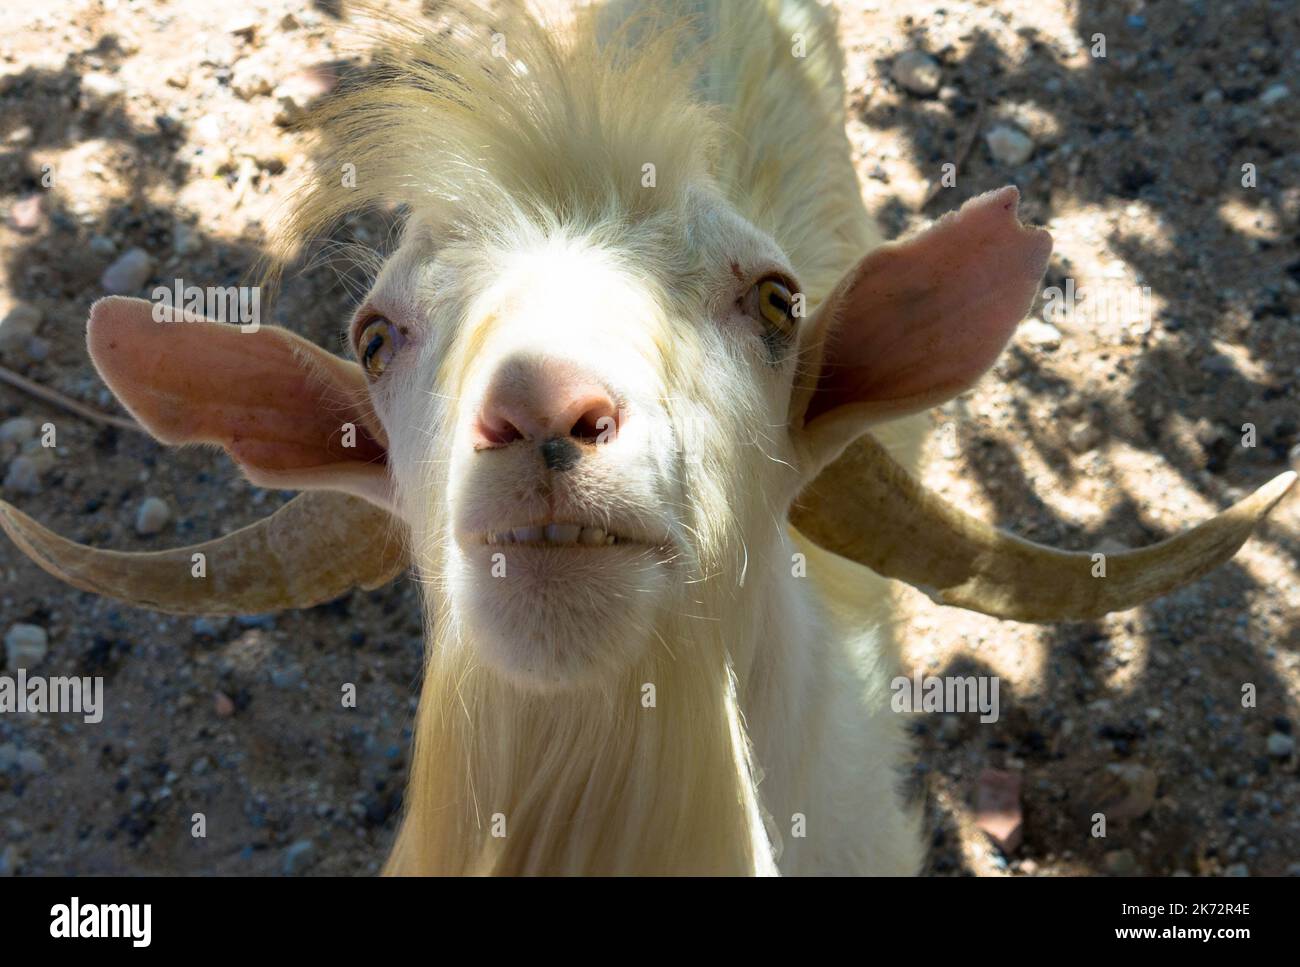 The muzzle of a white goat Stock Photo